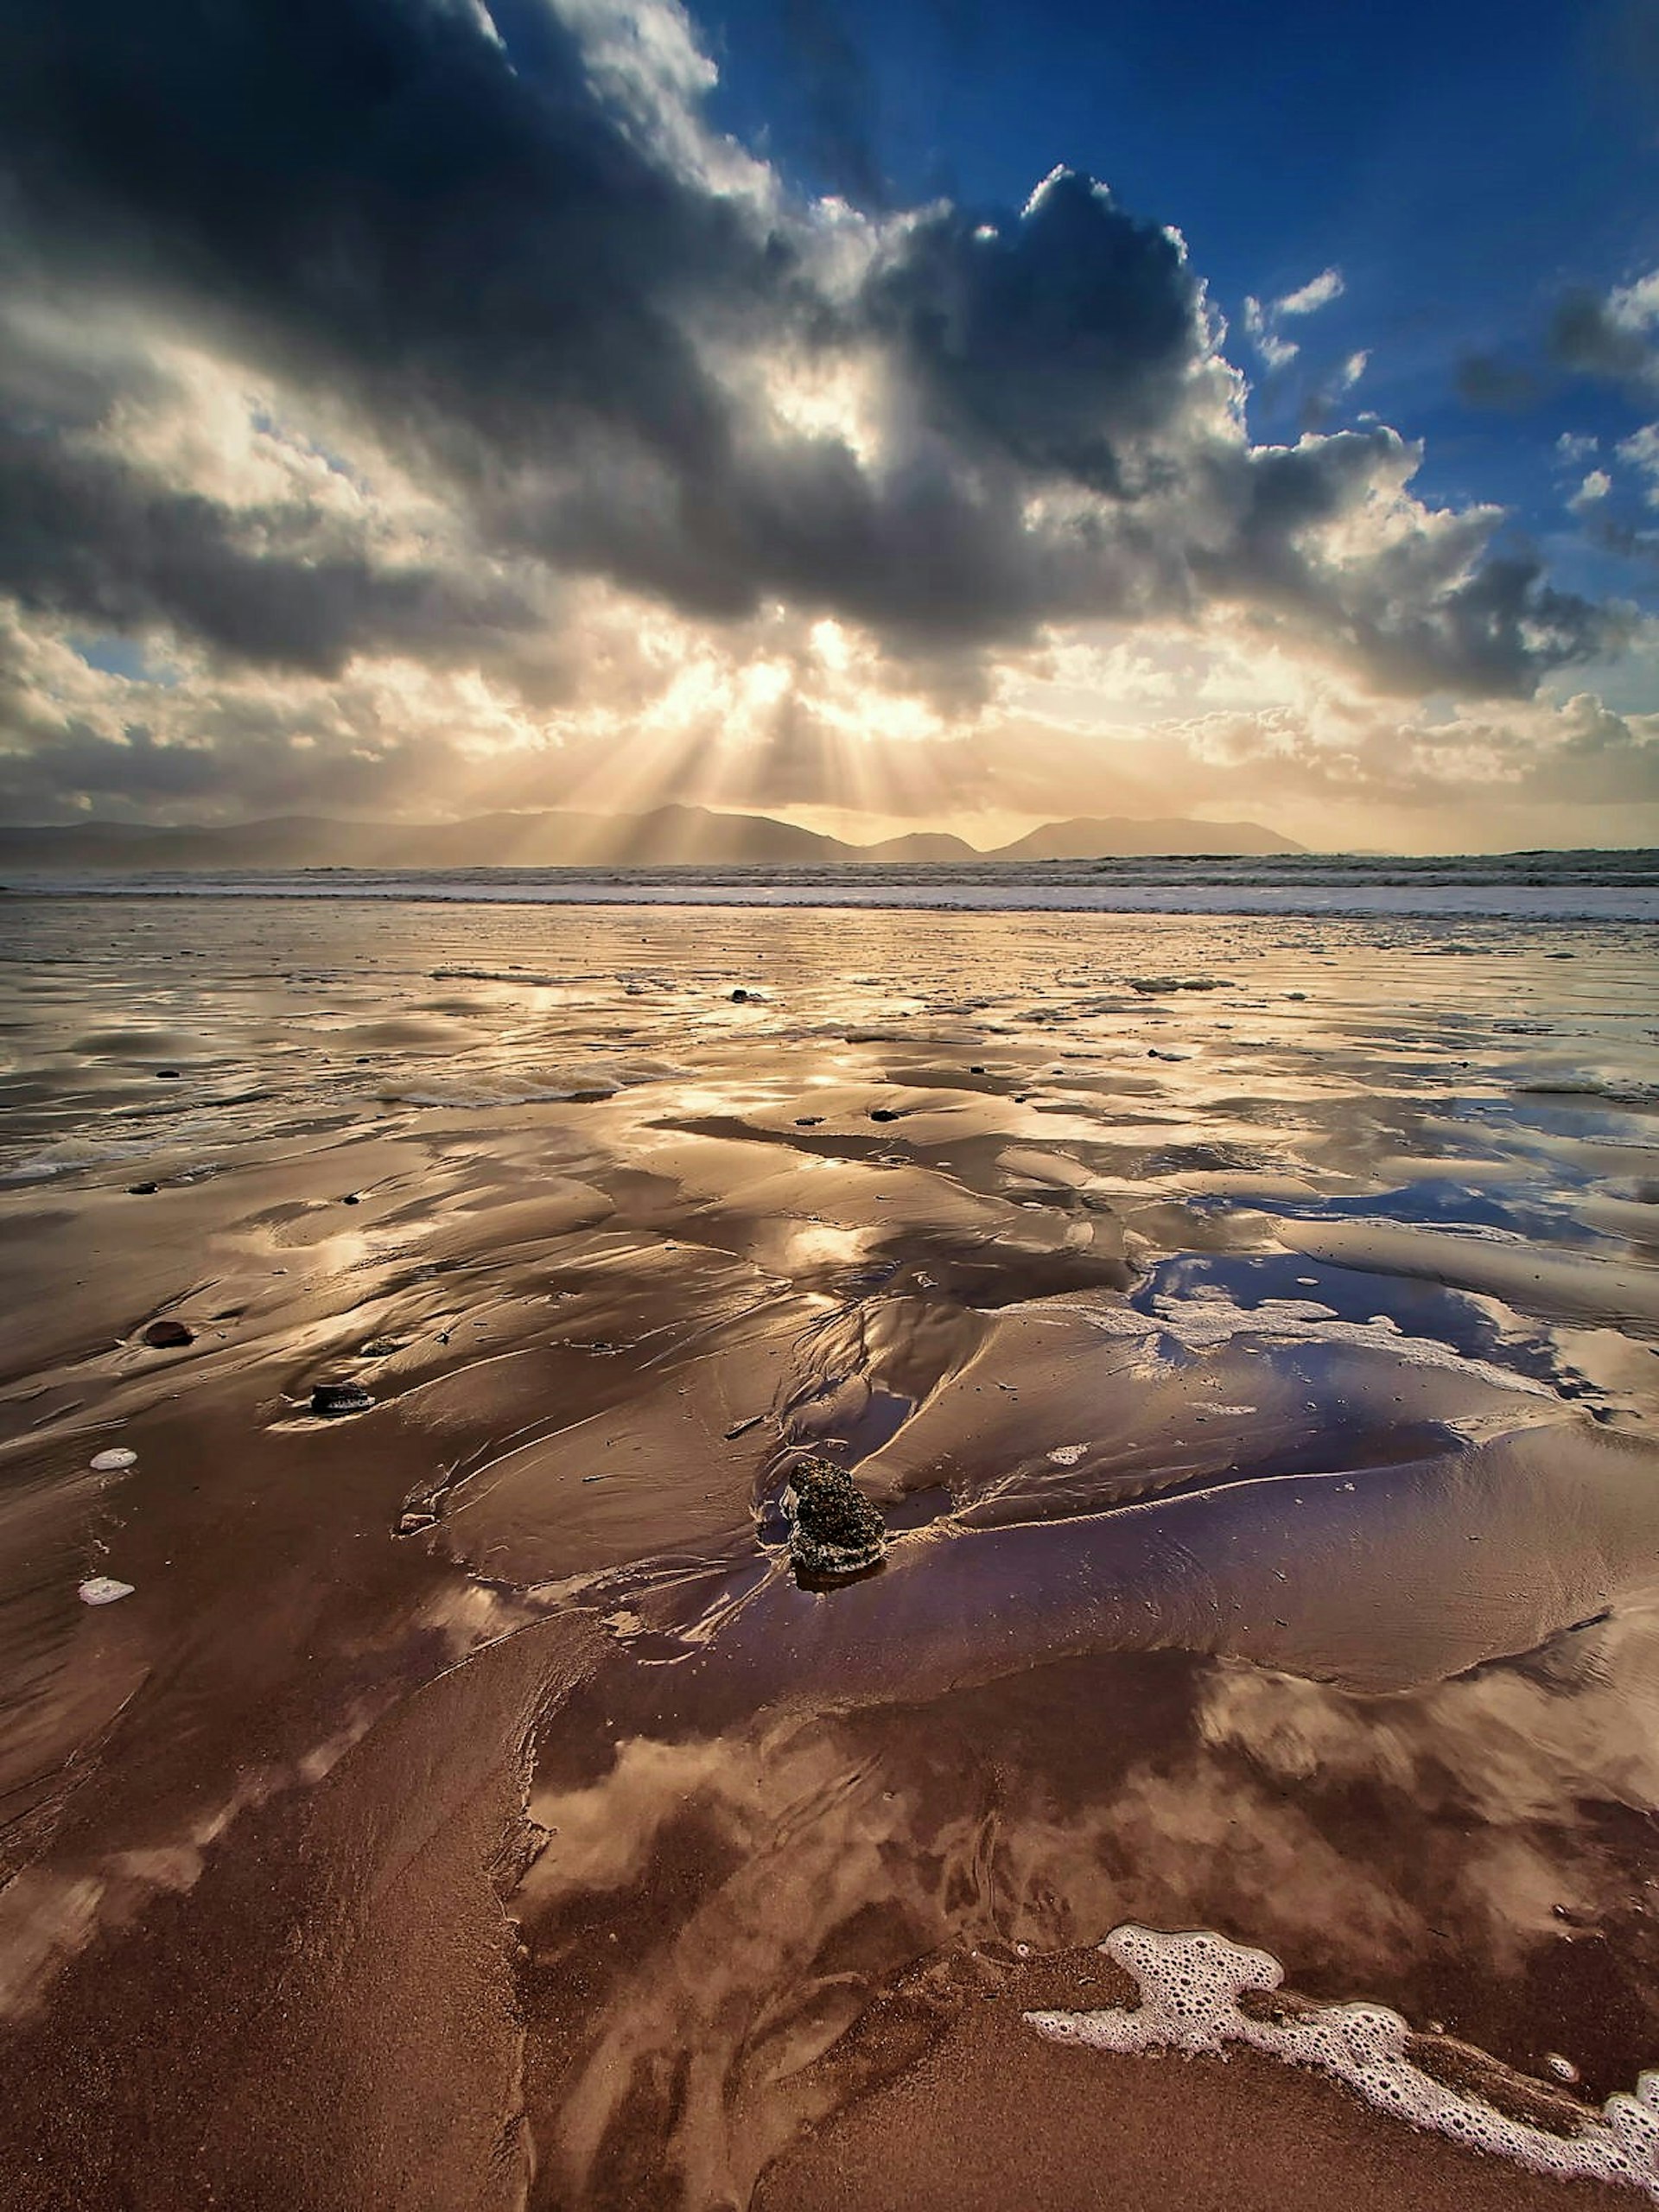 The sun pokes through some clouds over Inch Beach